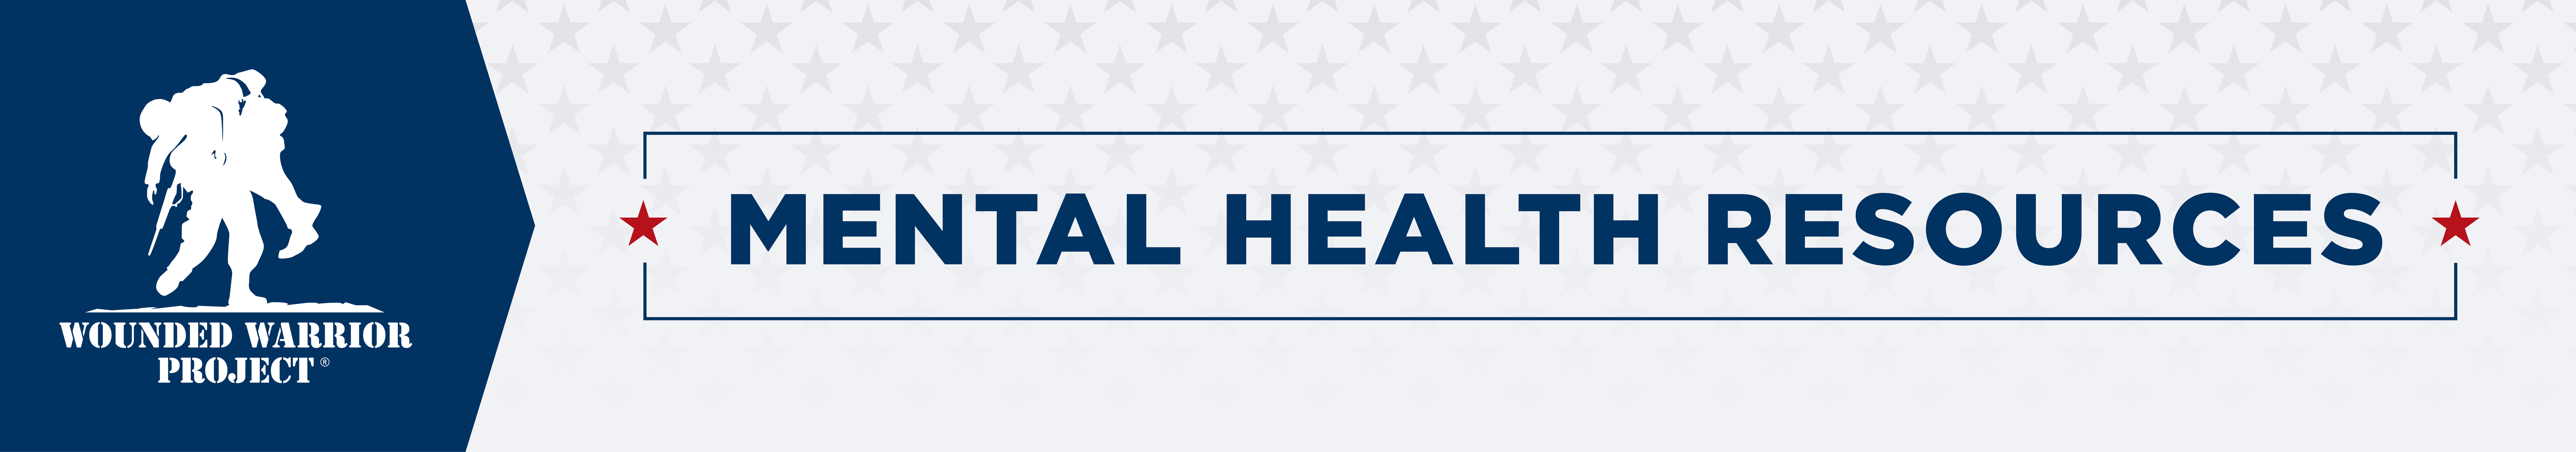 Wounded Warrior Project | Mental Health Resources